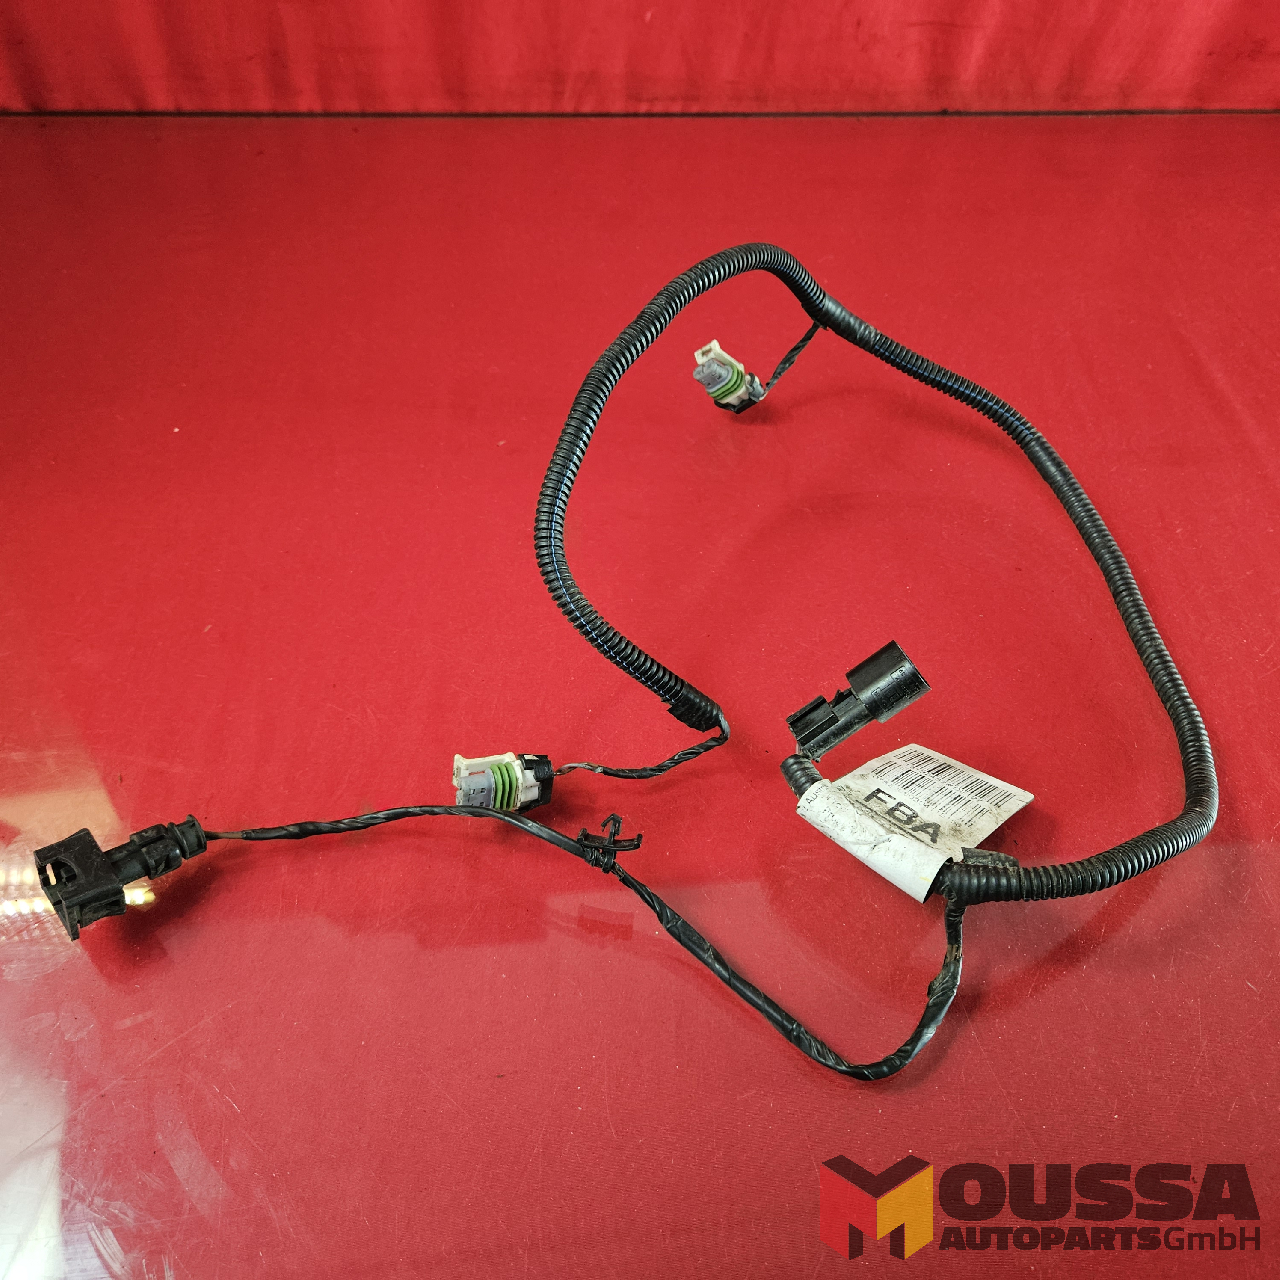 MOUSSA-AUTOPARTS-661ee75a8ee03.jpg